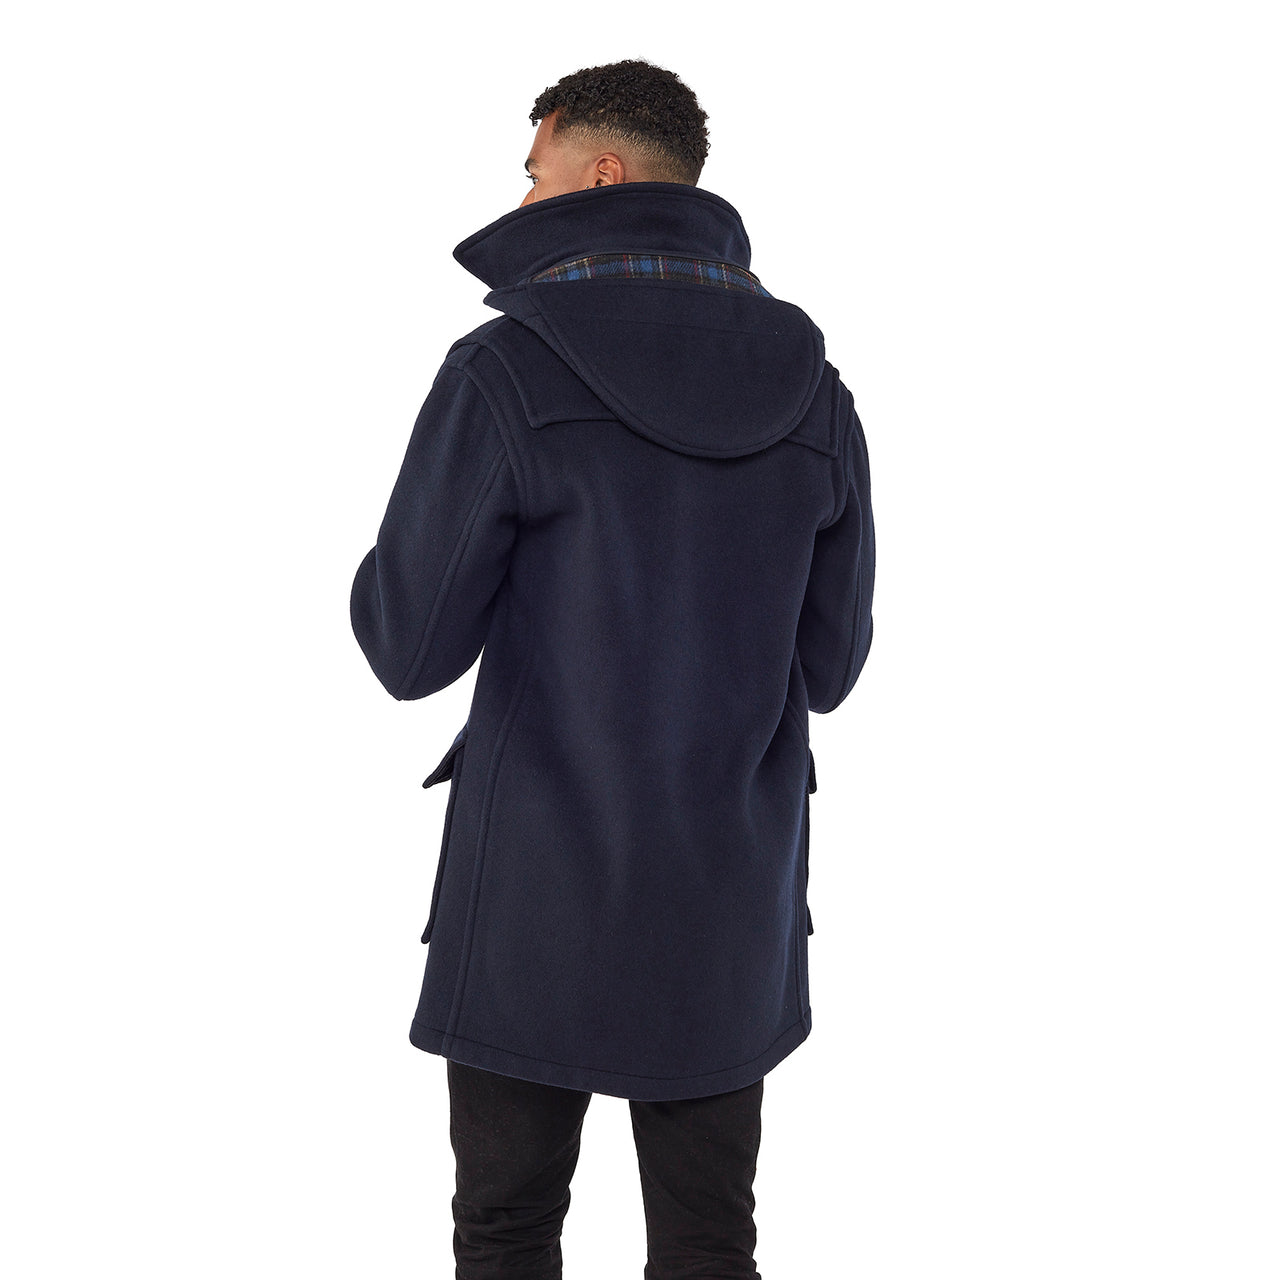 Men's Navy London Custom Fit Convertible Duffle Coat, With Original Removable Hood And Horn Toggles